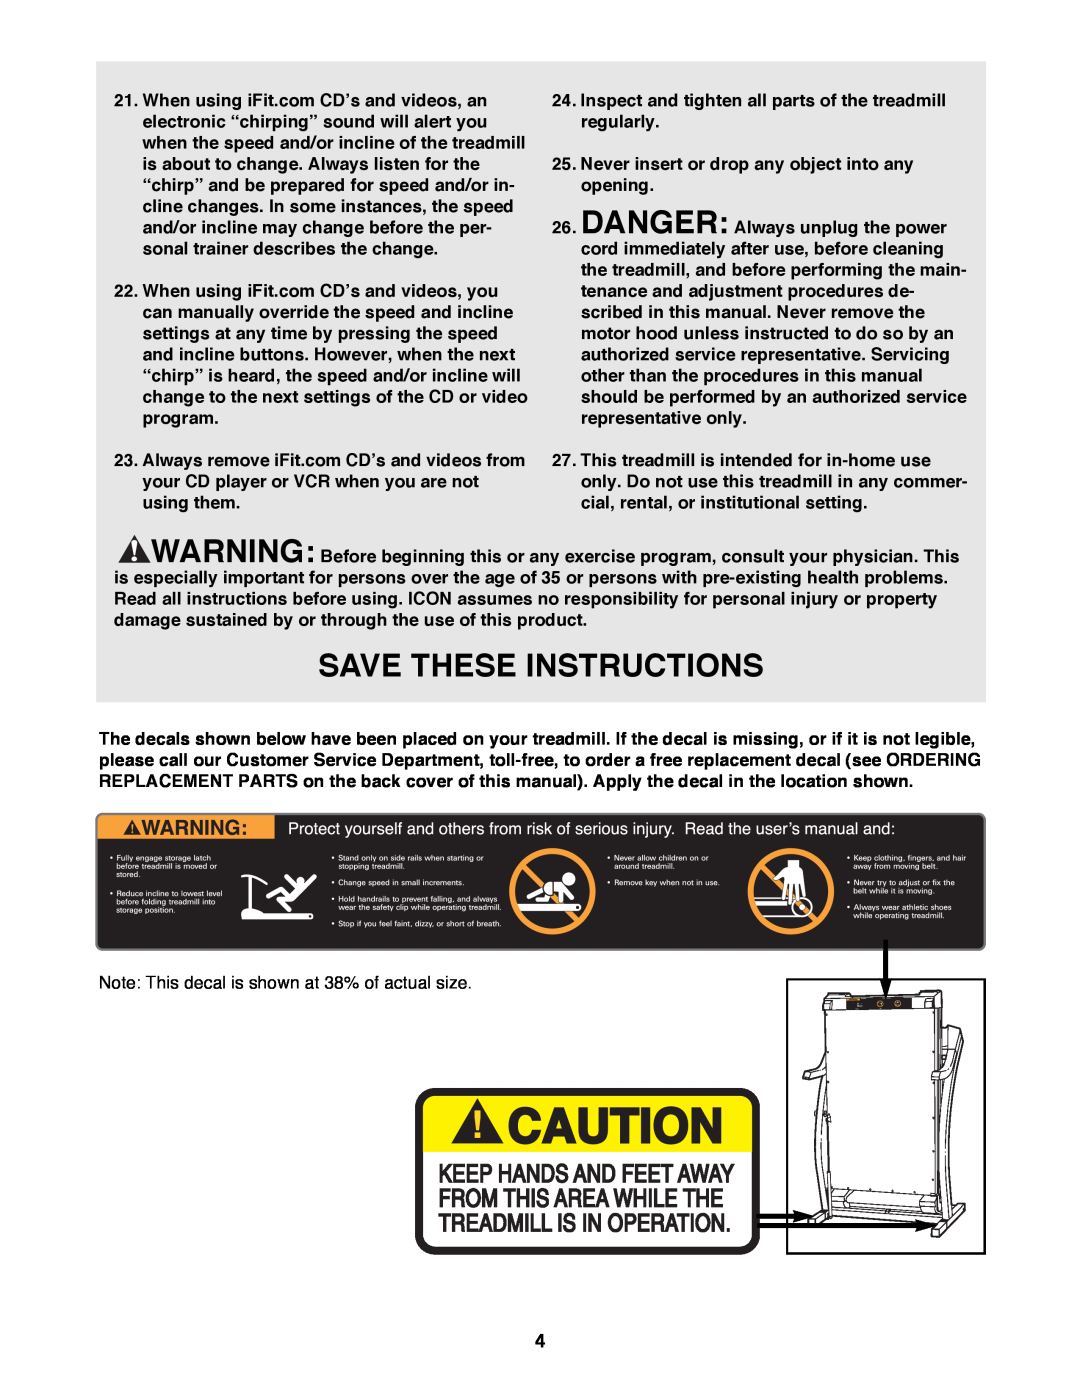 ProForm 785Pi user manual Save These Instructions, Inspect and tighten all parts of the treadmill regularly 